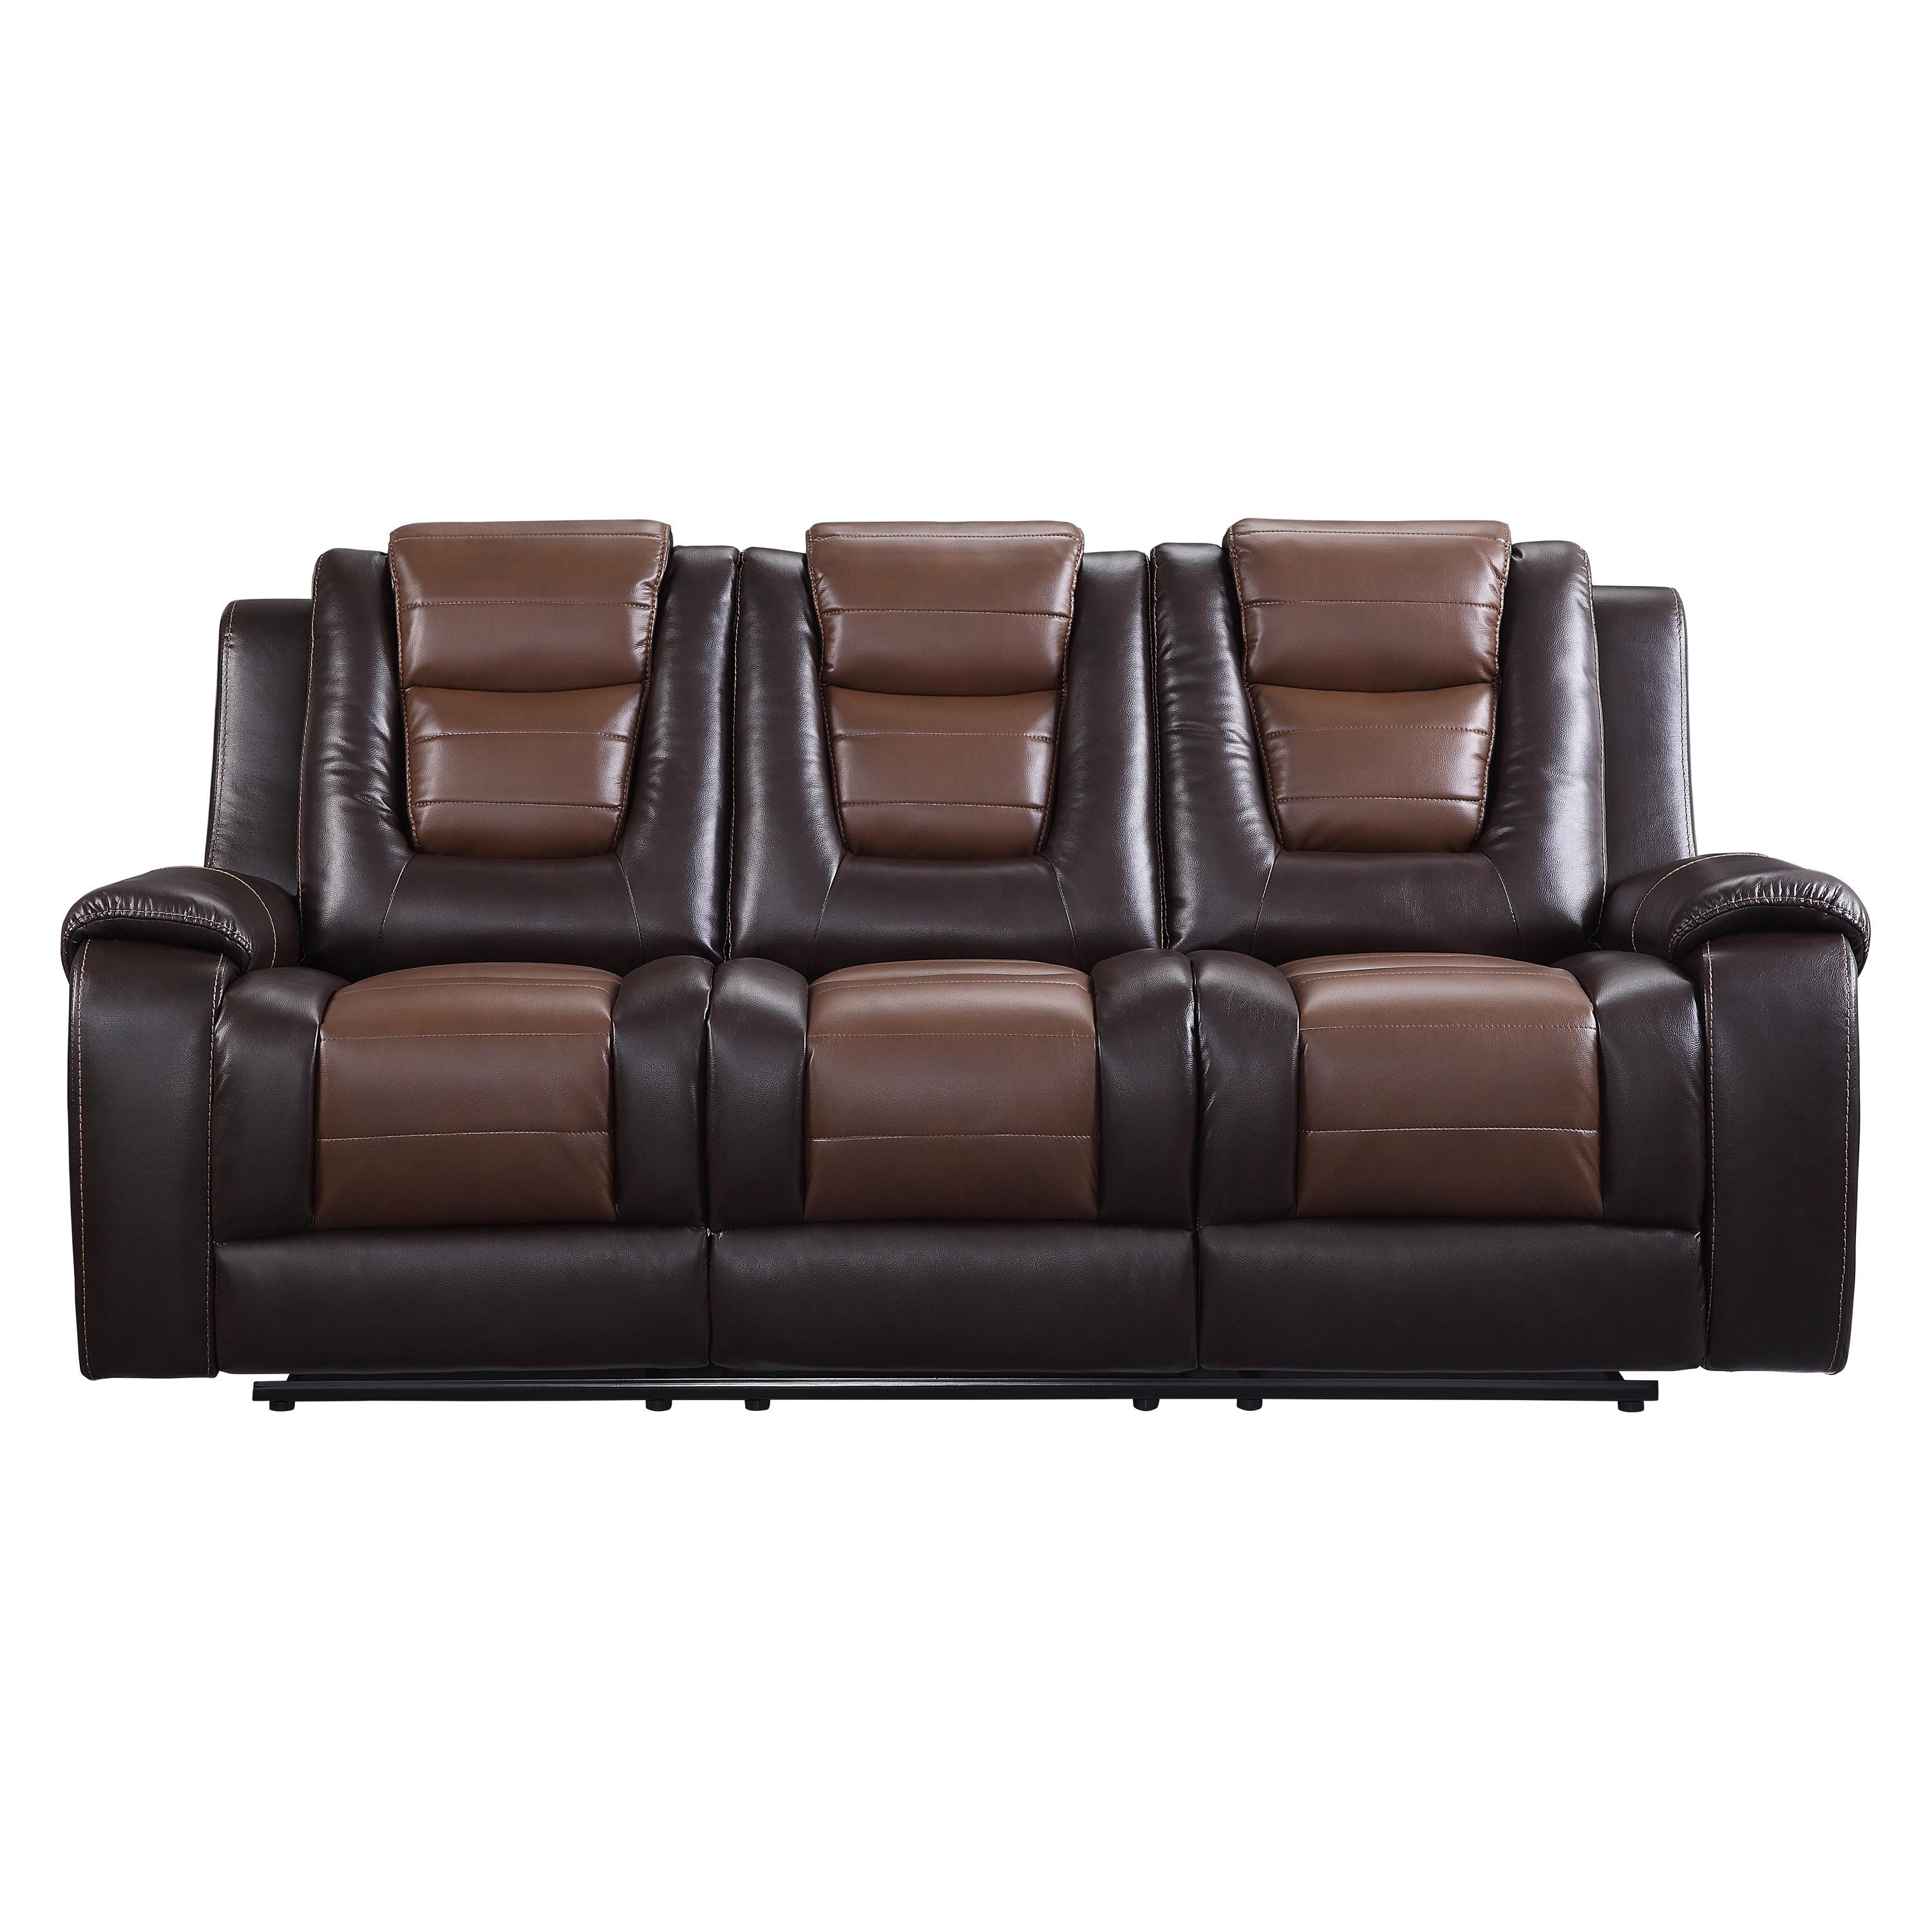 Transitional Reclining Sofa 9470BR-3 Briscoe 9470BR-3 in Light Brown, Dark Brown Faux Leather